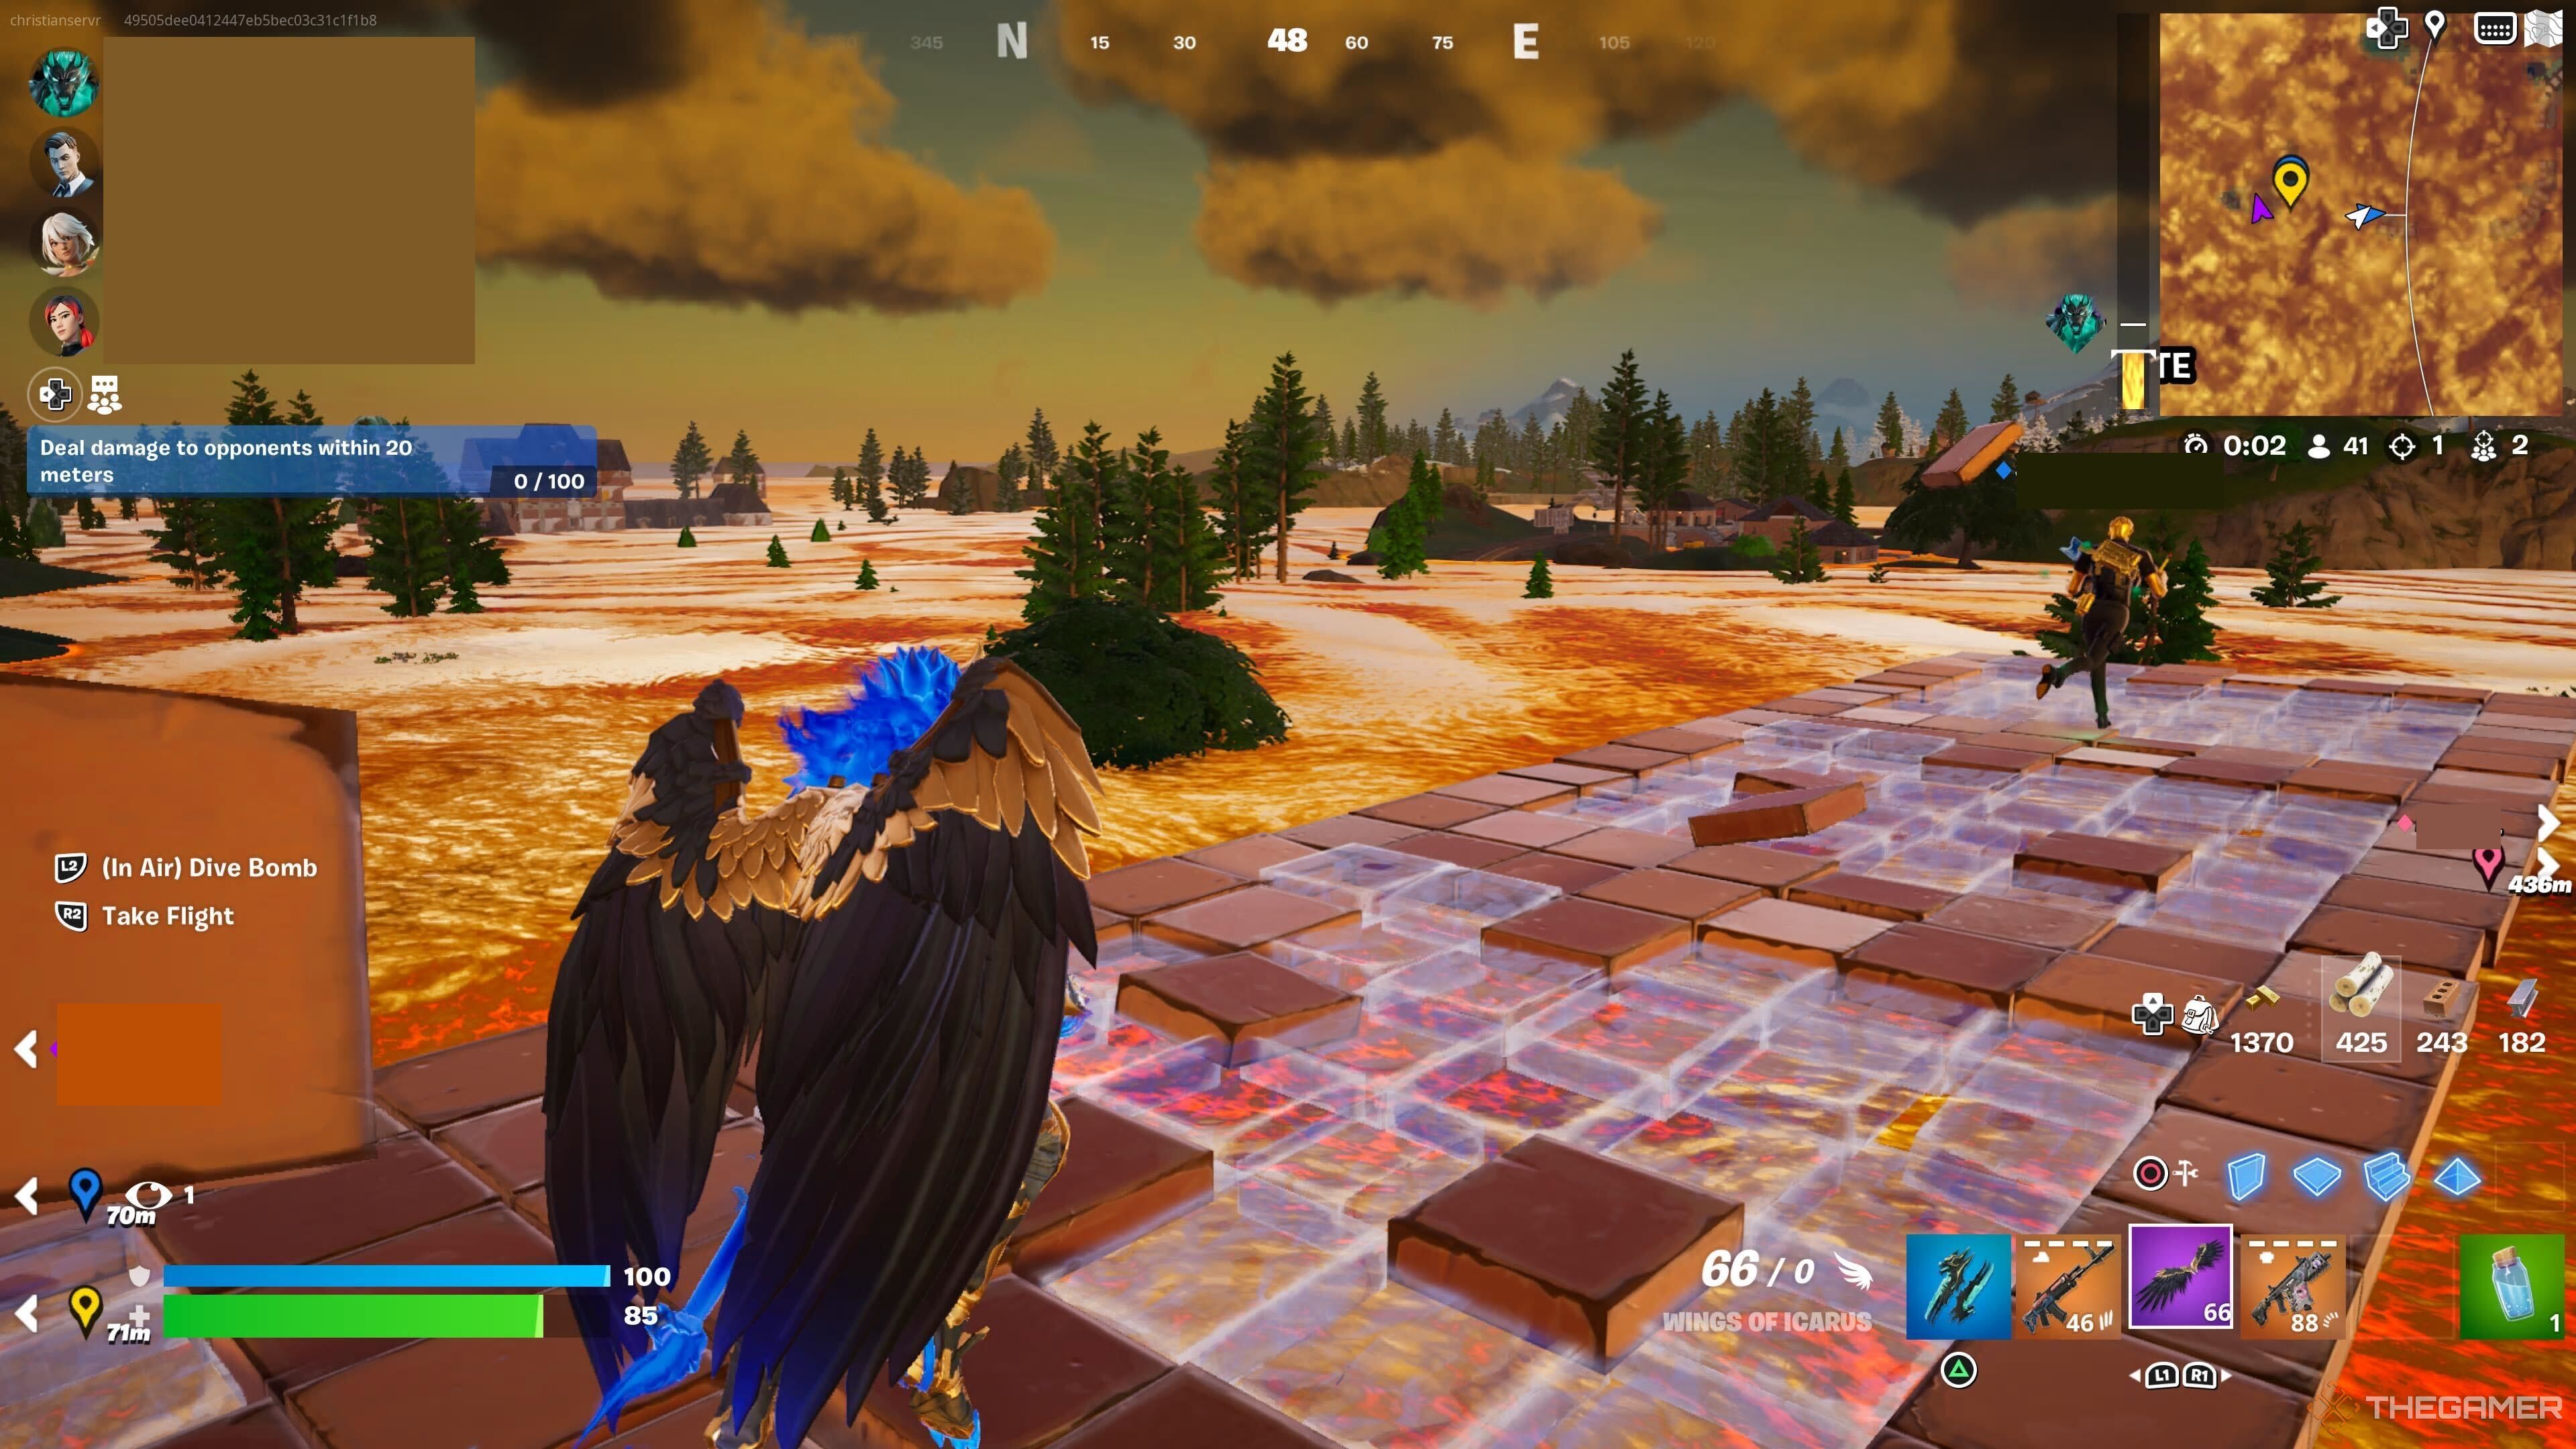 A screenshot from Fortnite showing the player character standing on a brick platform being built by an ally over the rising molten gold mixture.